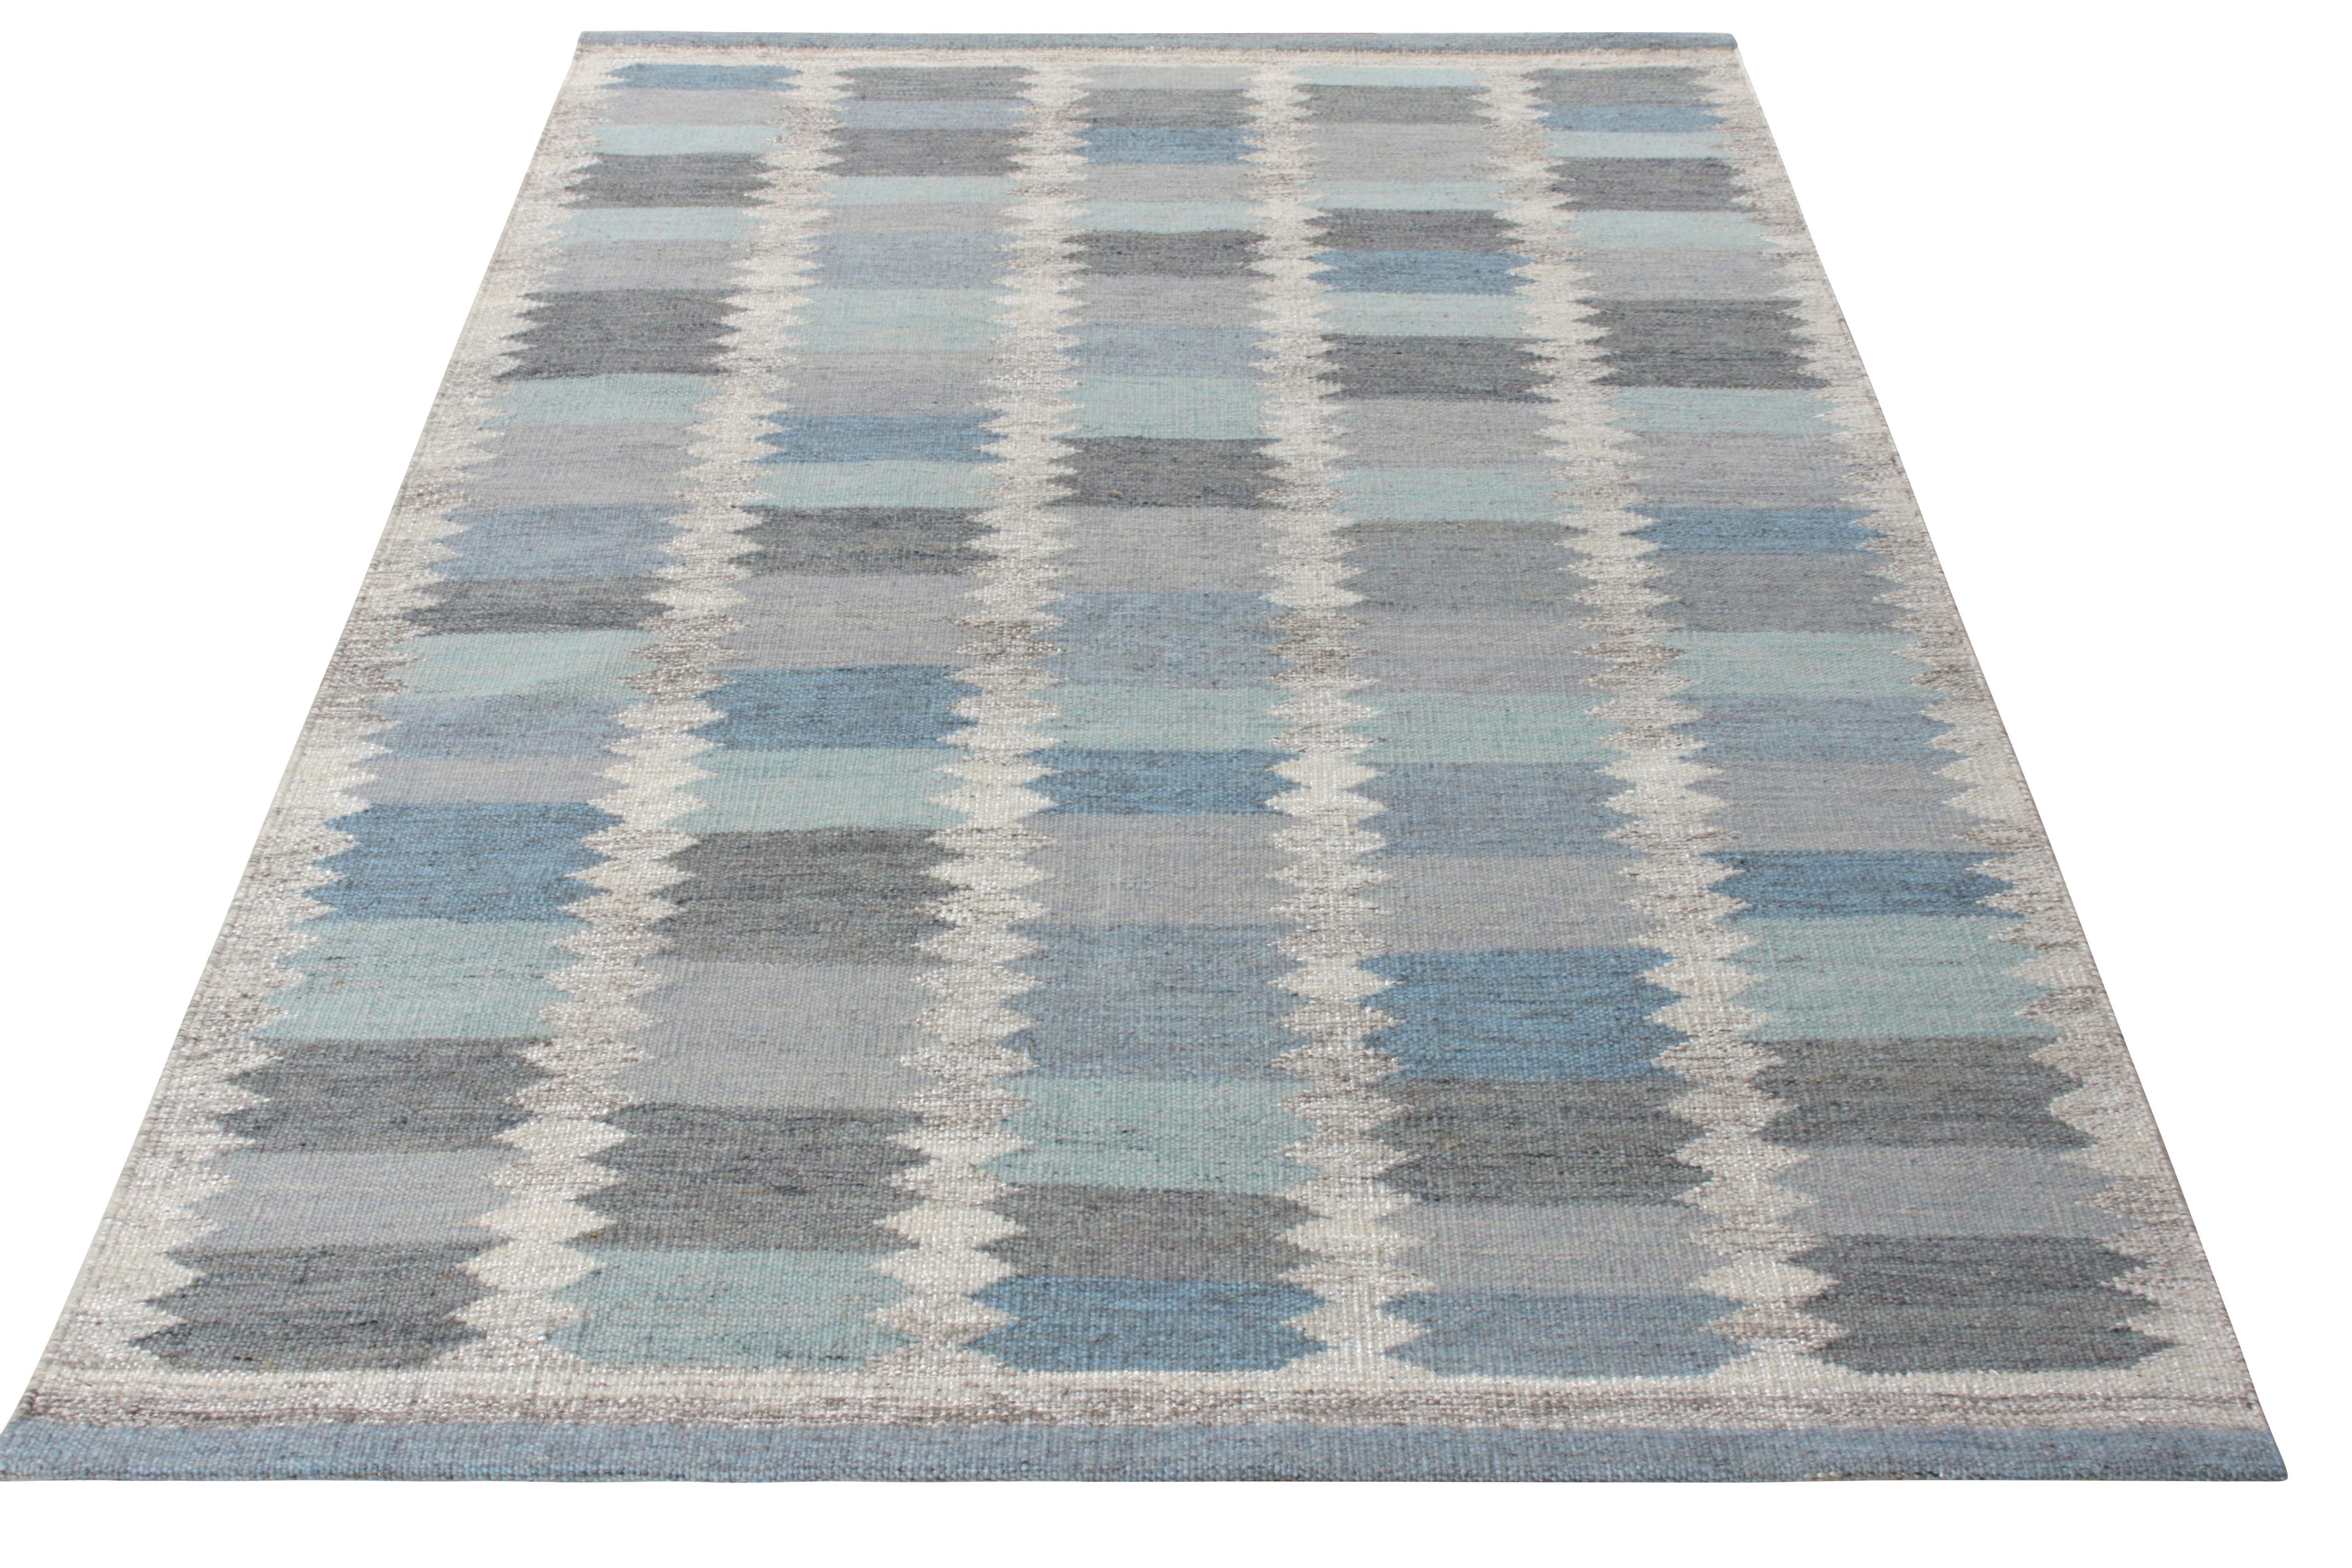 A 6x9 handwoven wool Kilim from Rug & Kilim’s award-winning Scandinavian flat weave collection. Featuring a symmetric horizontal striation in shades of blue & gray, the rug enjoys a scintillating sense of movement with a series of diamond patterns